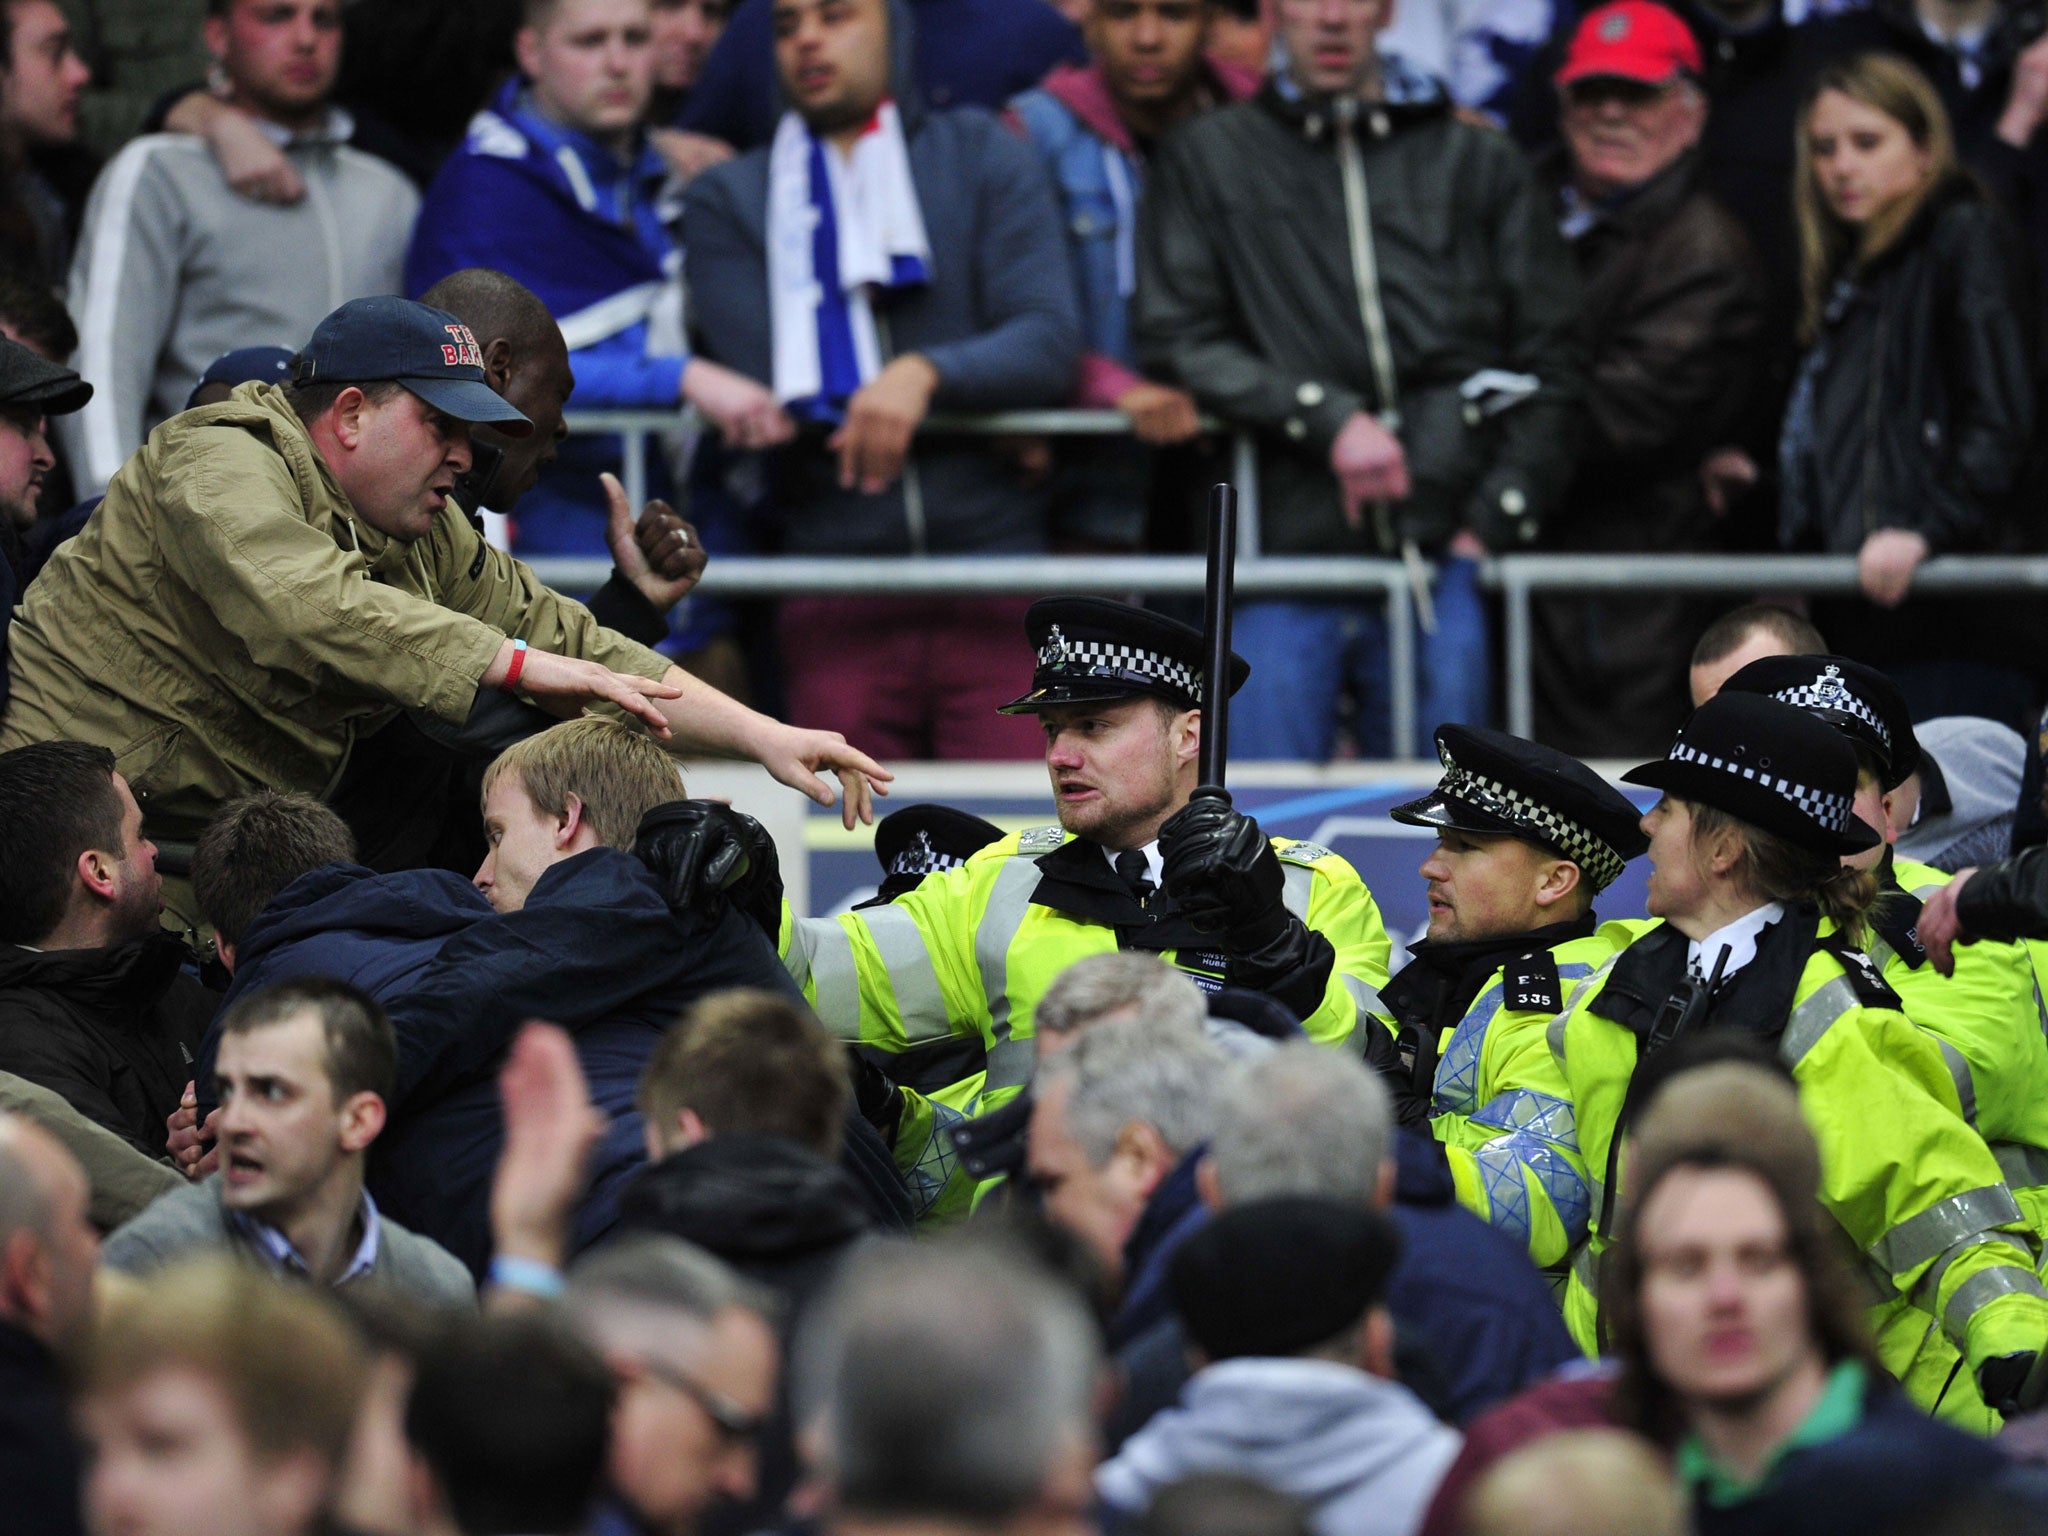 The club's community programme will work to undo the damage caused to its image by rioting fans